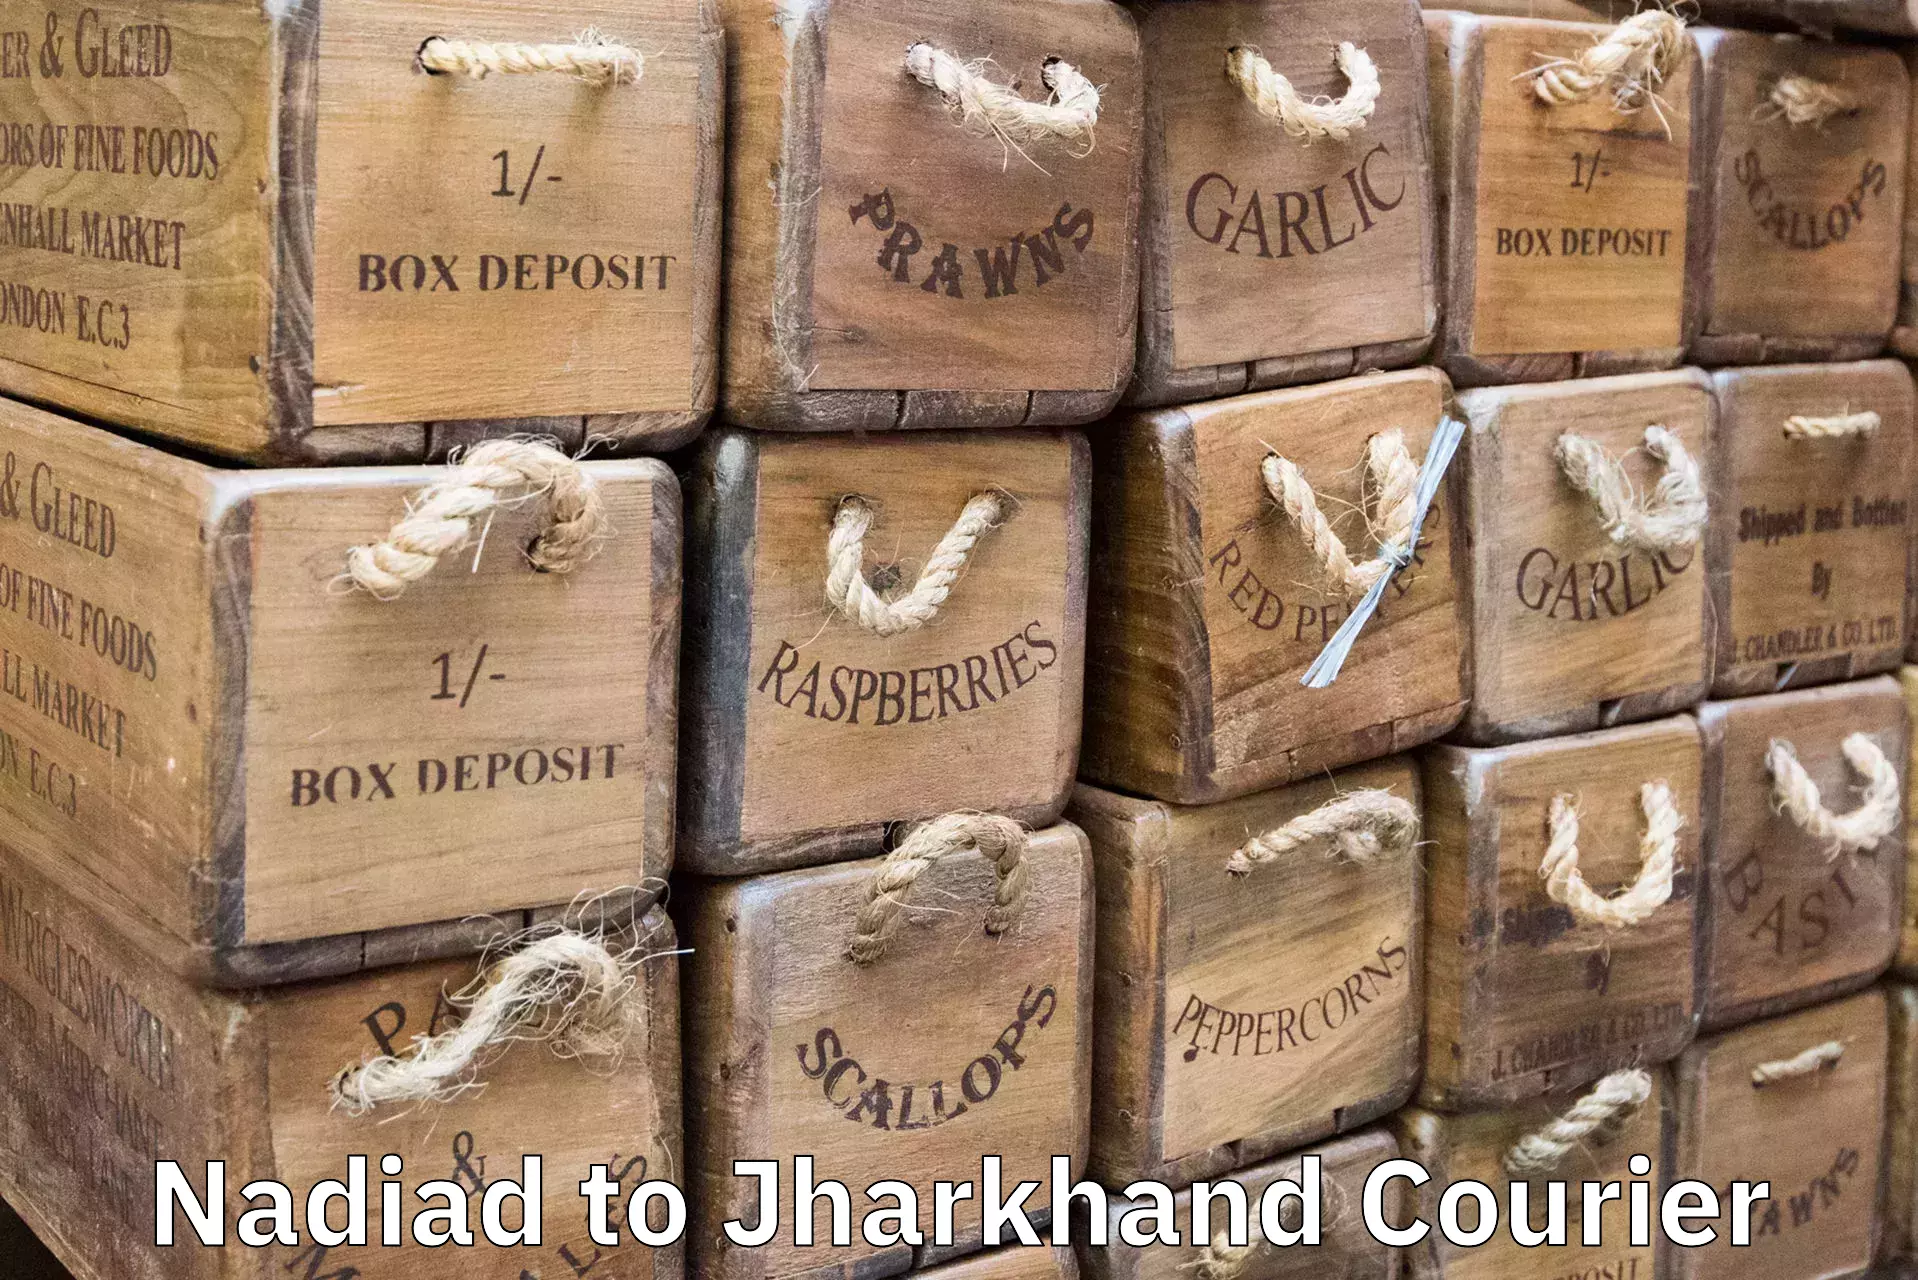 High-quality baggage shipment in Nadiad to Jamshedpur